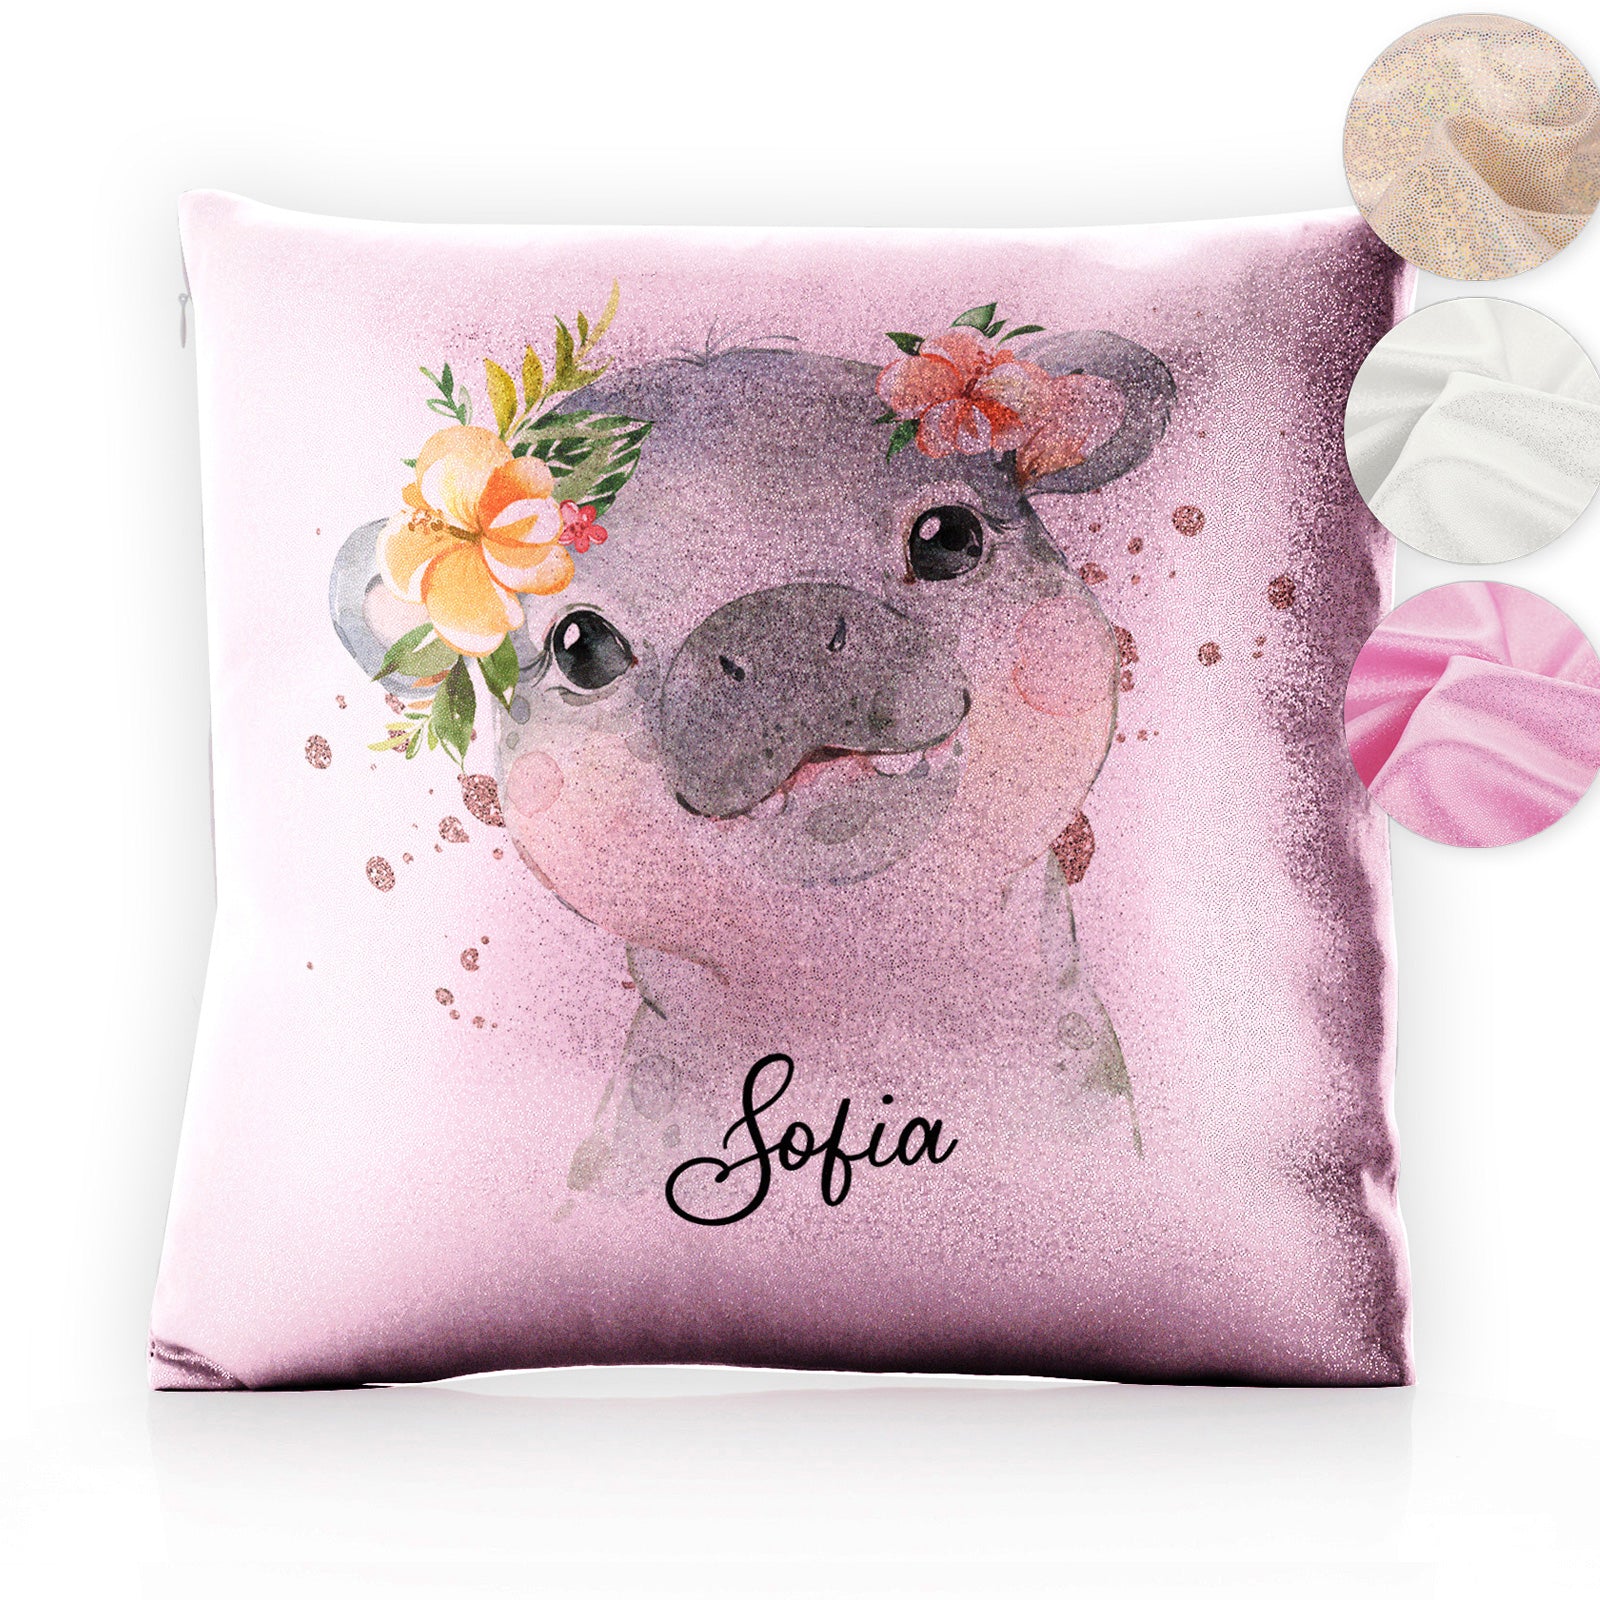 Personalised Glitter Cushion with Hippo Rain Drop Glitter Print and Cute Text